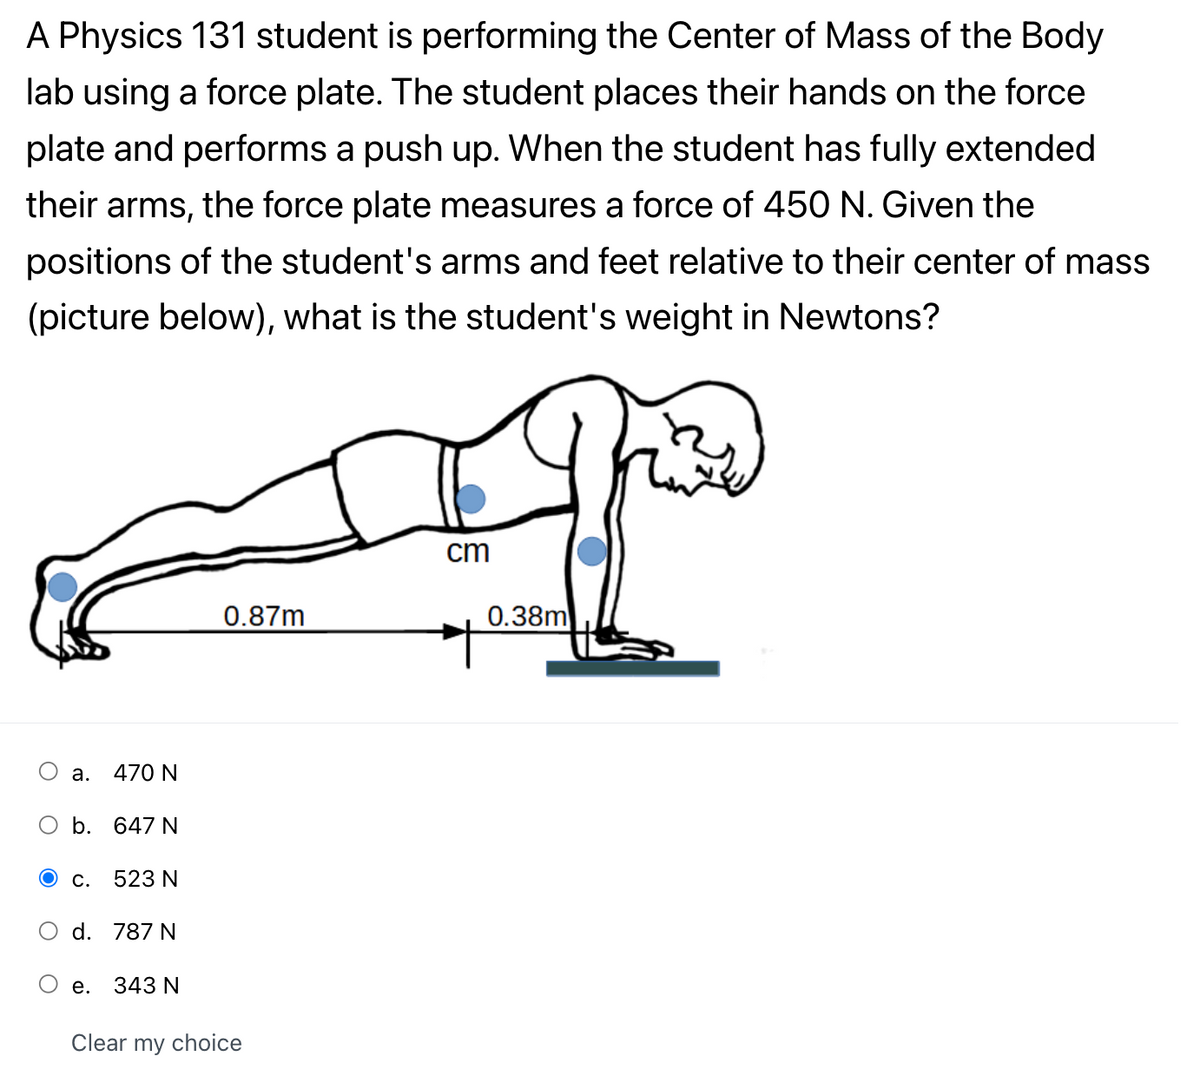 A Physics 131 student is performing the Center of Mass of the Body
lab using a force plate. The student places their hands on the force
plate and performs a push up. When the student has fully extended
their arms, the force plate measures a force of 450 N. Given the
positions of the student's arms and feet relative to their center of mass
(picture below), what is the student's weight in Newtons?
cm
0.87m
0.38m
а.
470 N
b.
647 N
С.
523 N
d. 787 N
е.
343 N
Clear my choice
